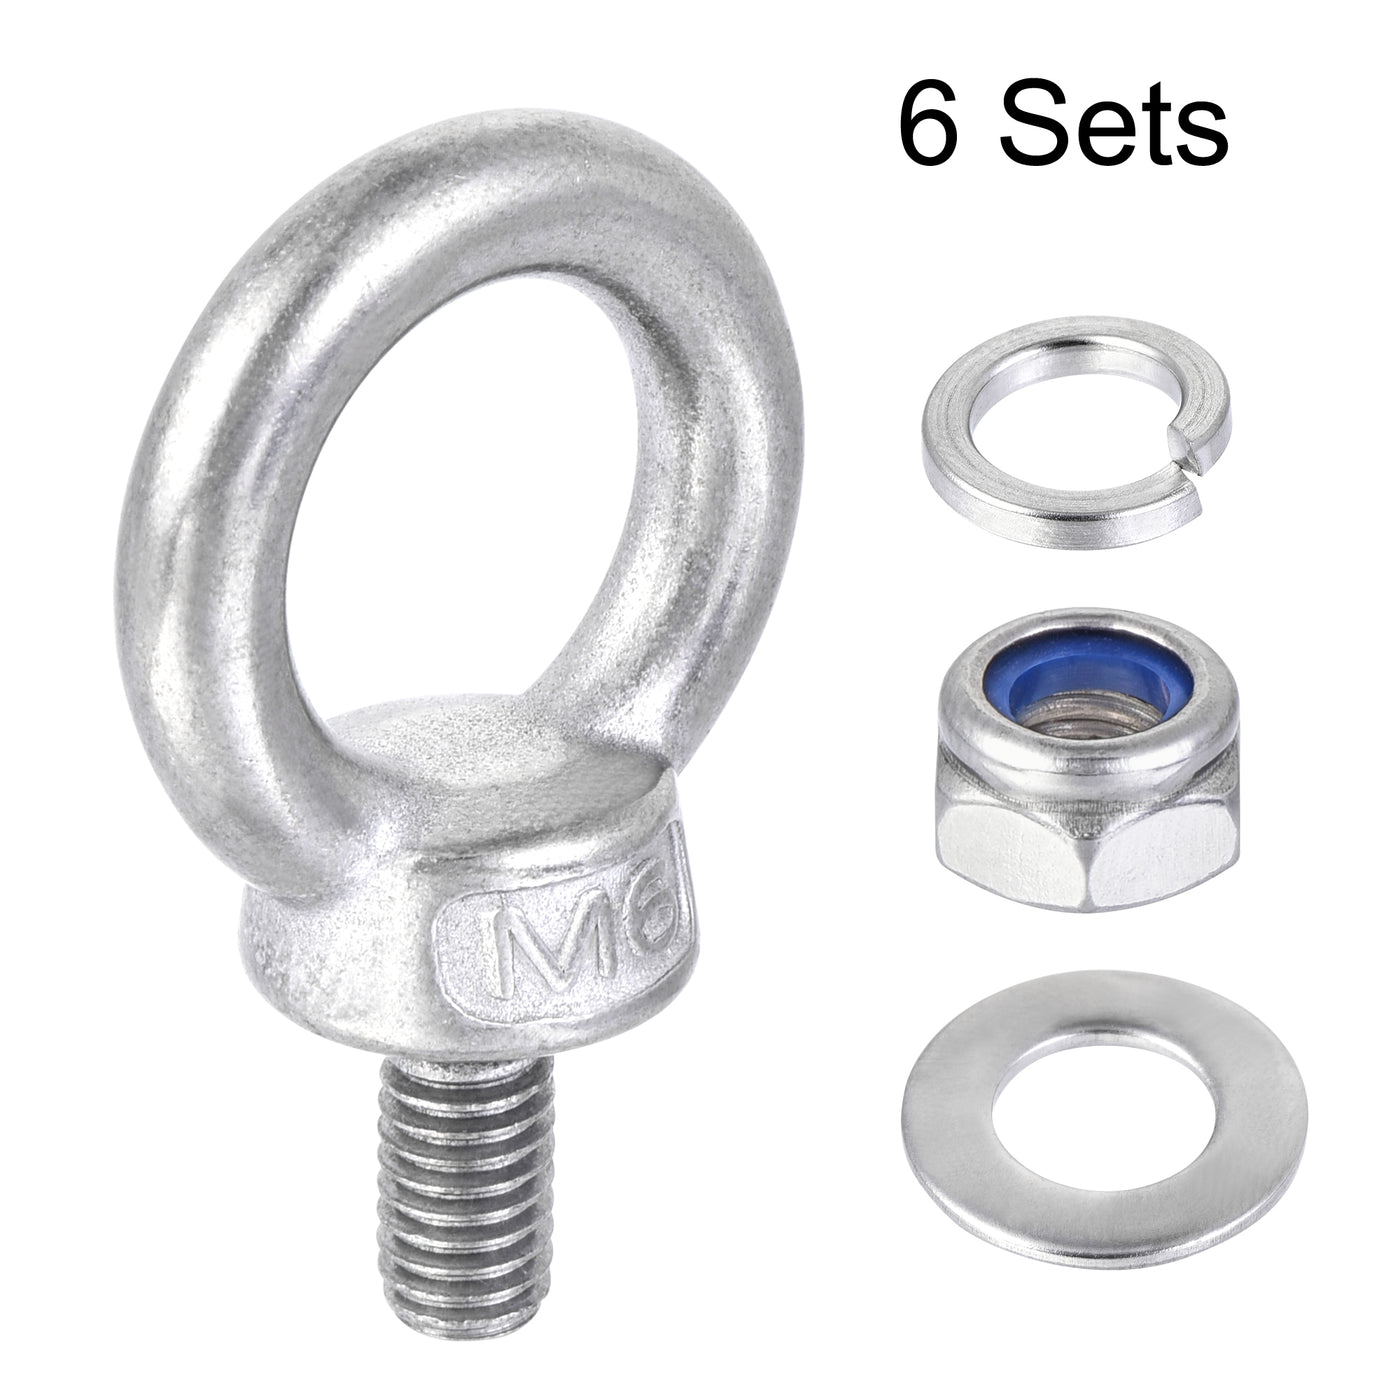 uxcell Uxcell Lifting Eye Bolt Male Thread with Hex Screw Nut Gasket Flat Washer for Hanging, Stainless Steel